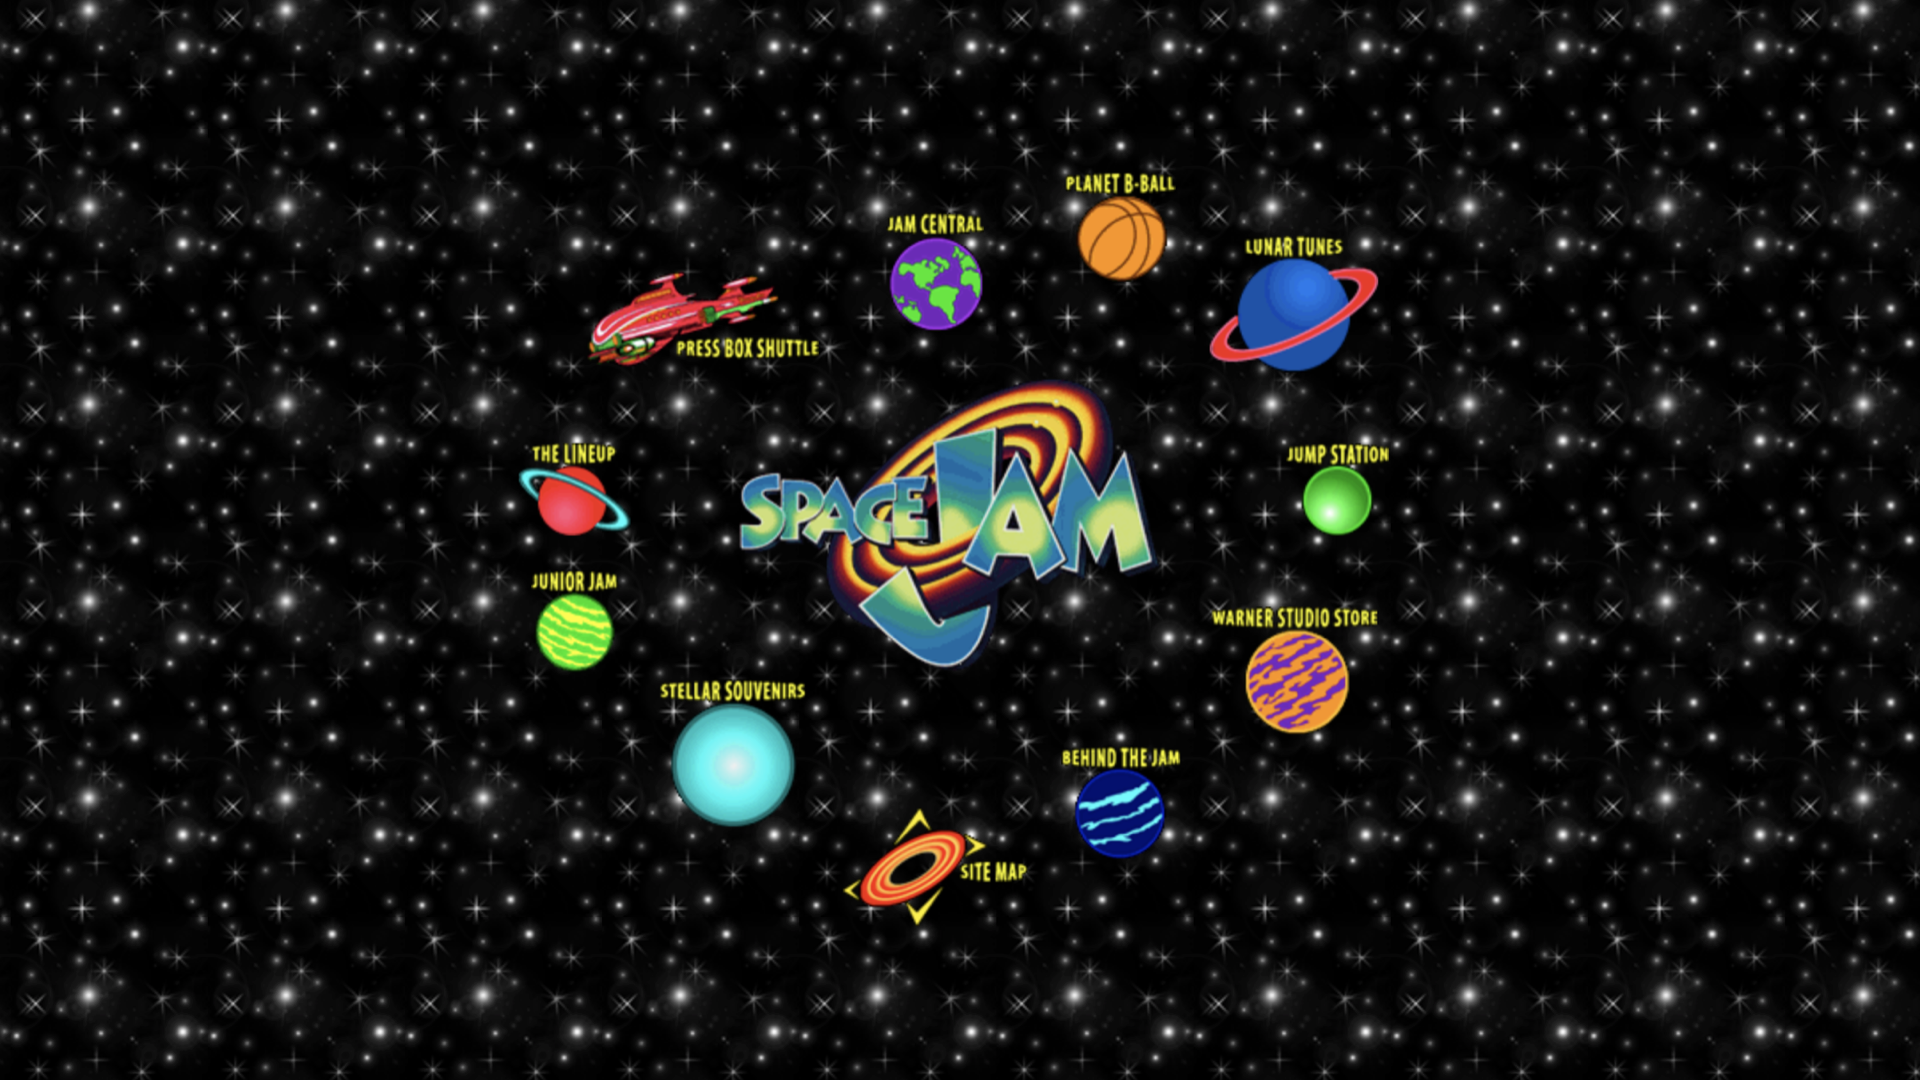 Website for the movie Space Jam, which has a tiled starfield background and a navigation menu made of planets orbiting the Space Jam logo in the center. I wish you could see it, it's truly beautiful, in an early-90s kind of way.